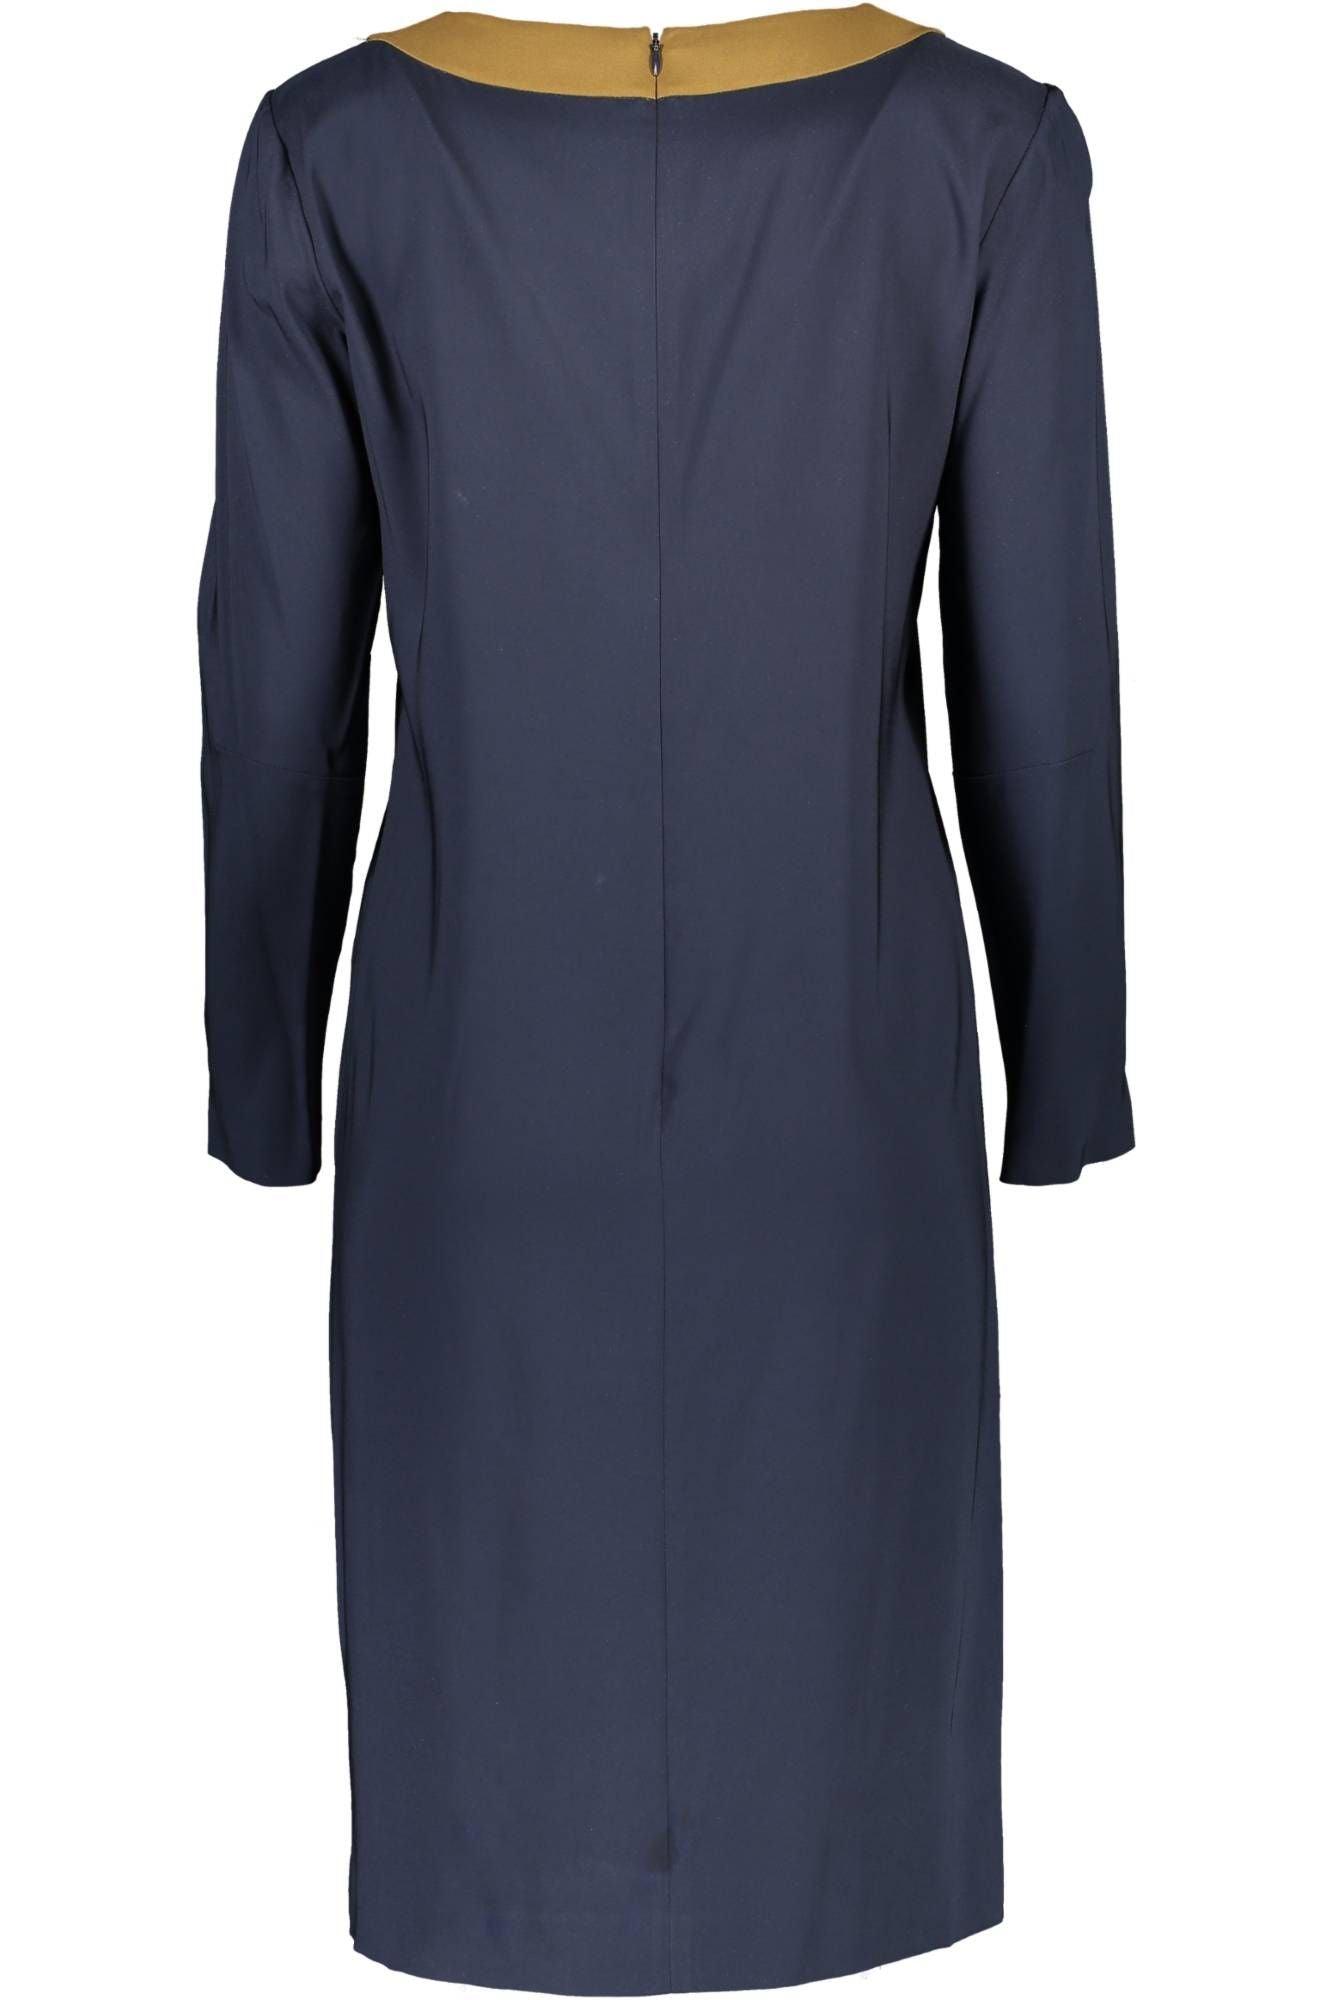 Gant Chic Blue Round Neck Dress with Contrasting Details - PER.FASHION